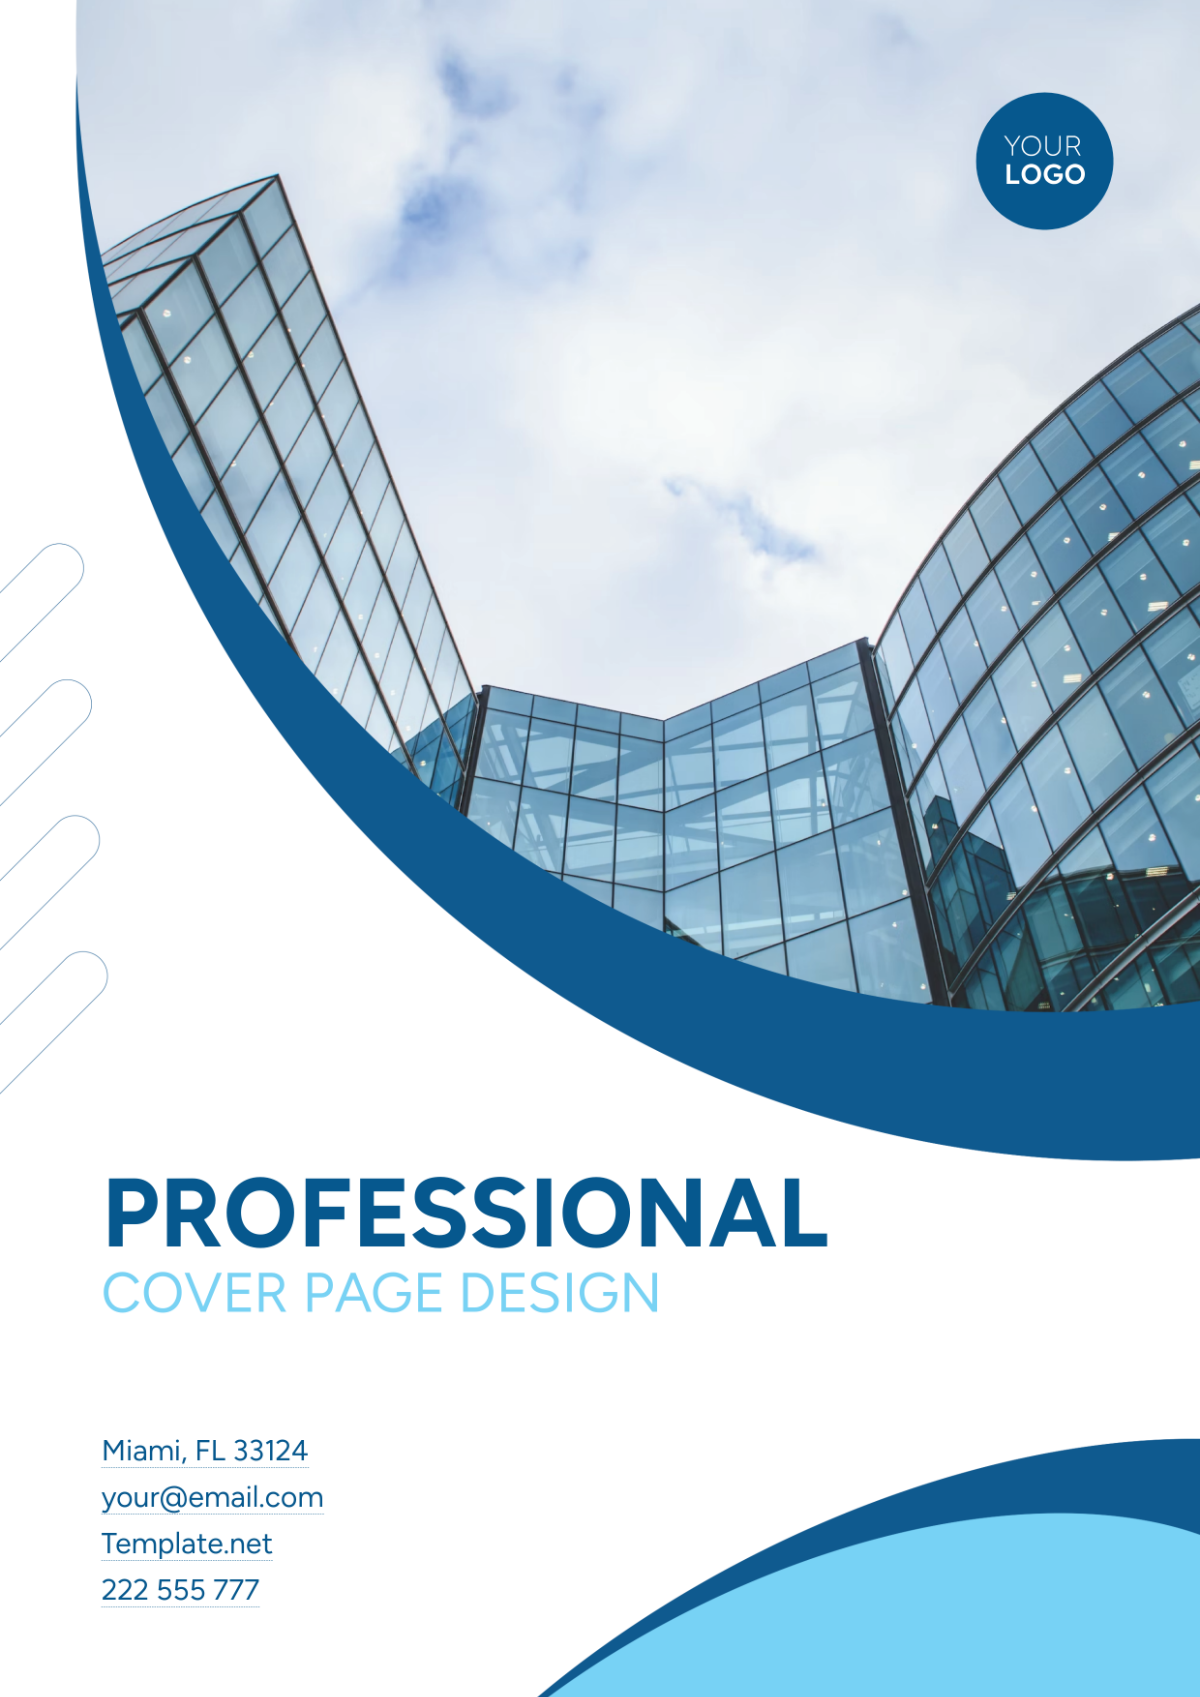 FREE Cover Page Design Templates & Examples - Edit Online & Download